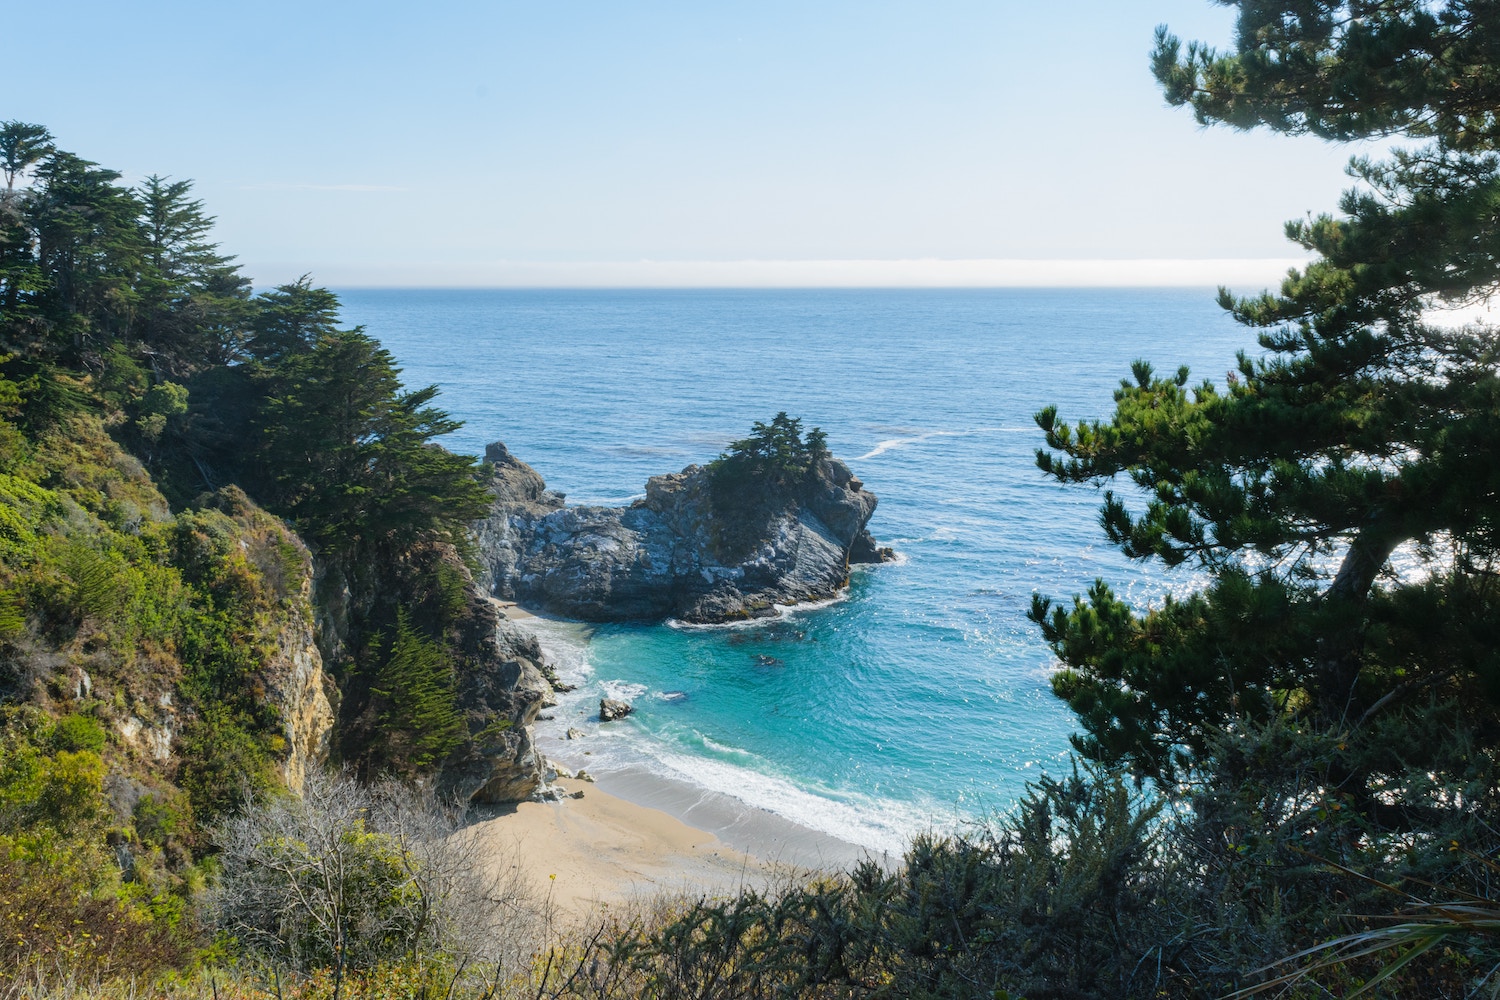 Overview of Pfeiffer Big Sur State Park